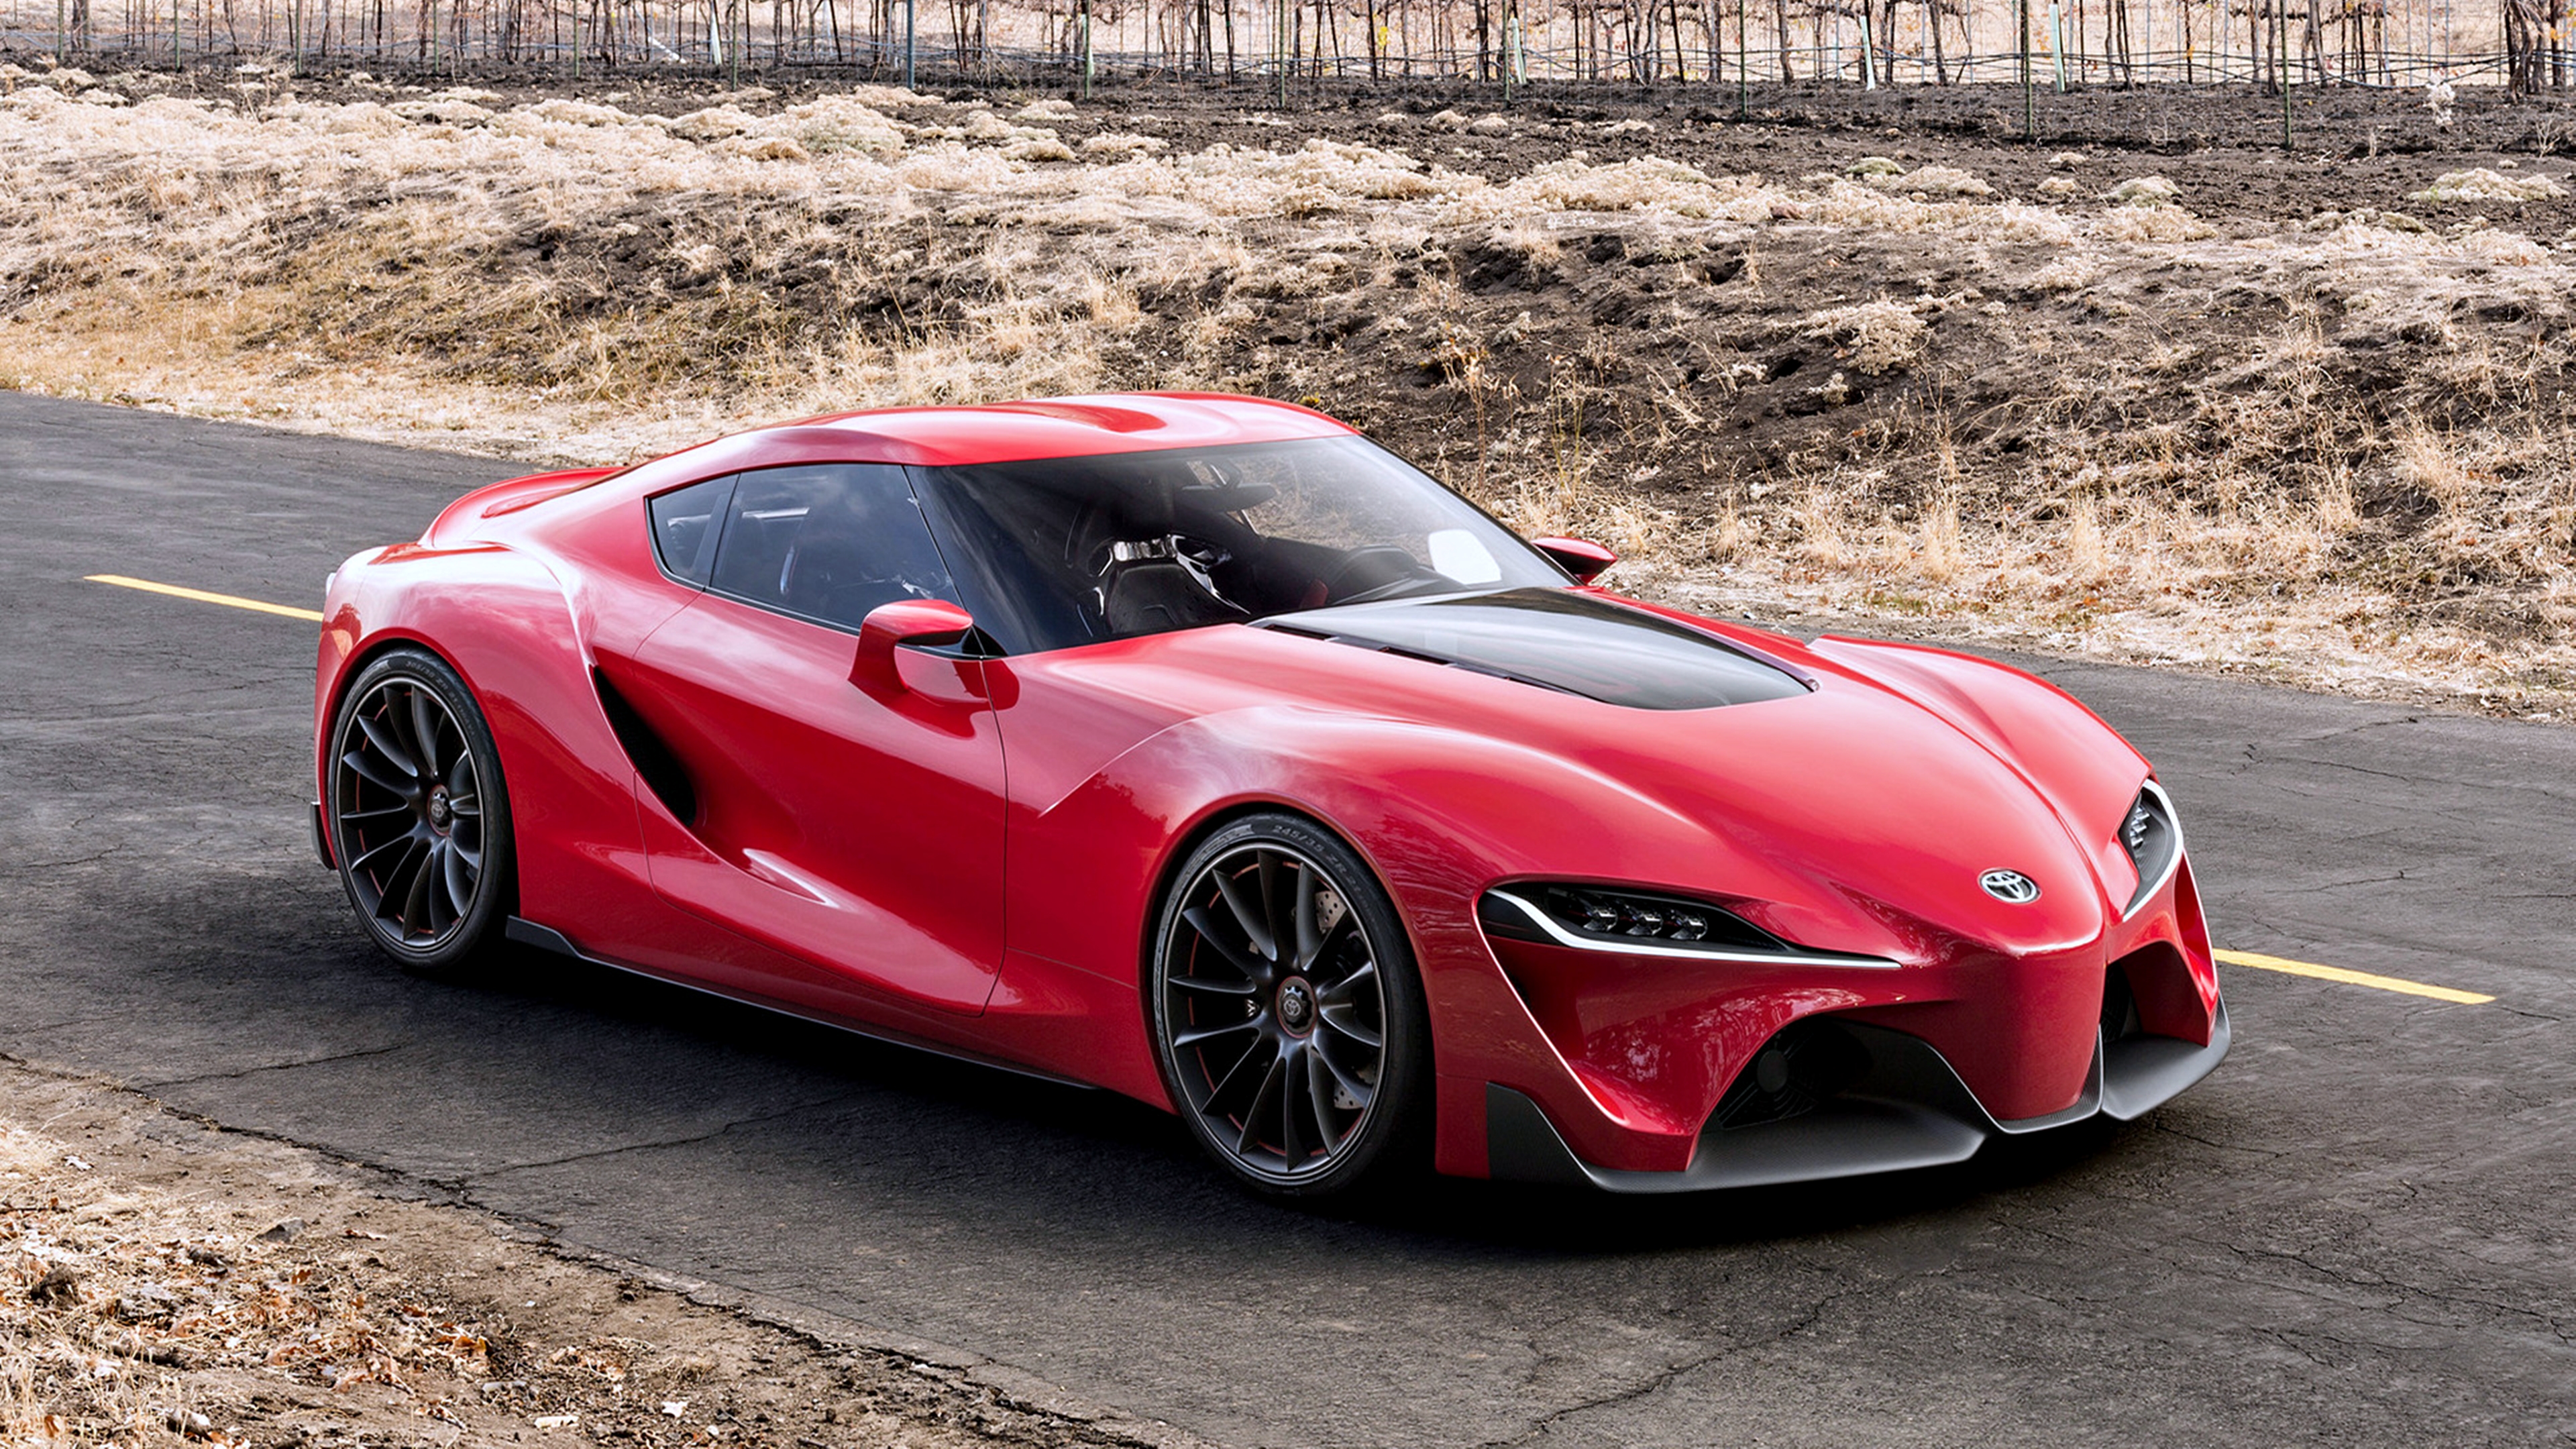 Supercar Car Toyota Toyota FT 1 Vehicle Red Car Concept Car 3840x2160